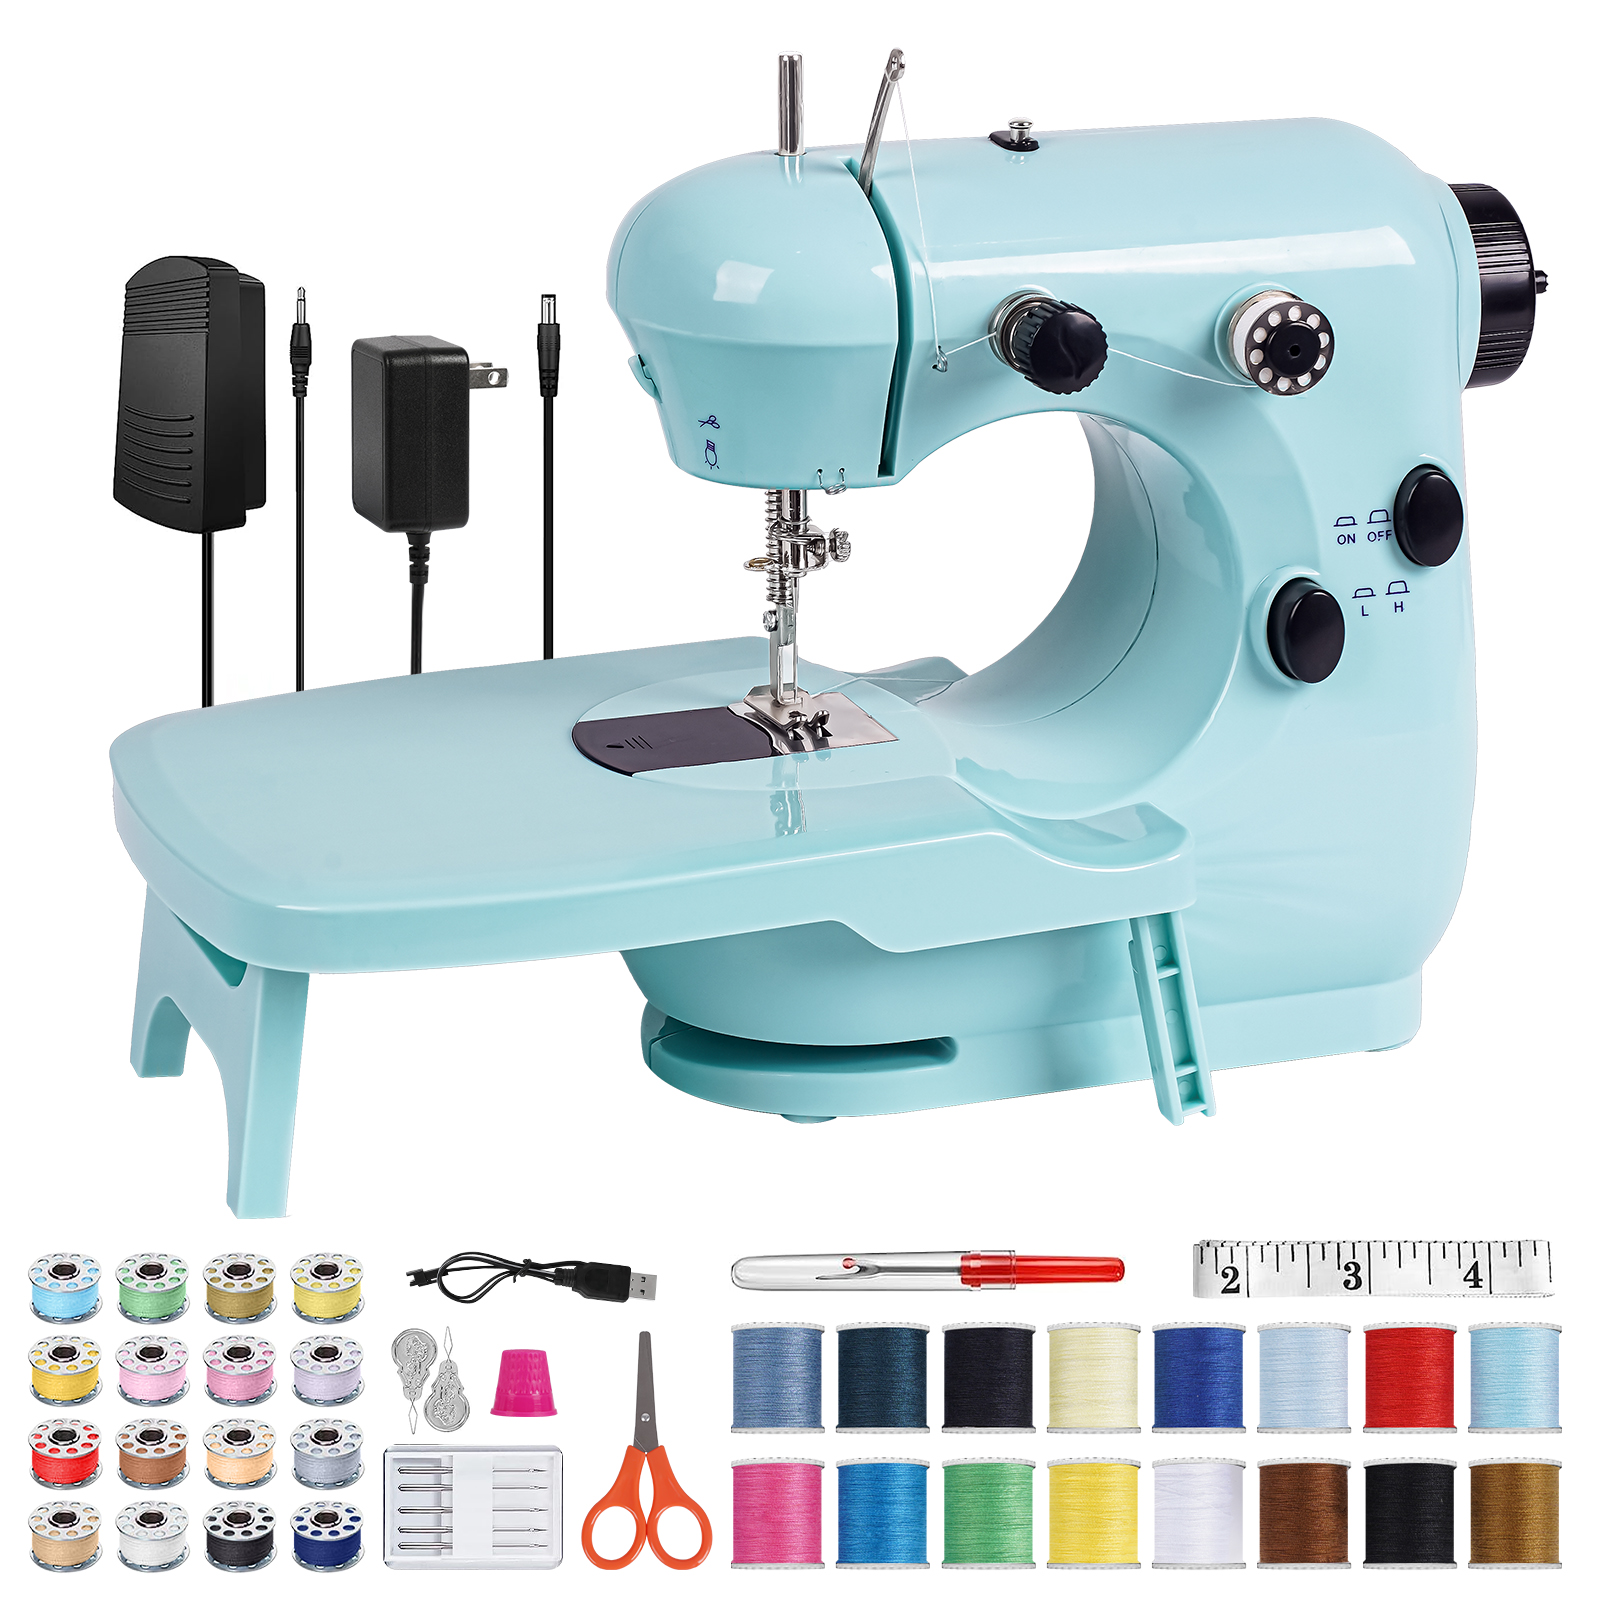 HOMWOO Mini Sewing Machine for Beginner, Dual Speed Portable Sewing Machine with Extension Table, Stitch, Sewing Kit for Household, Mother's Day Gifts - image 1 of 7